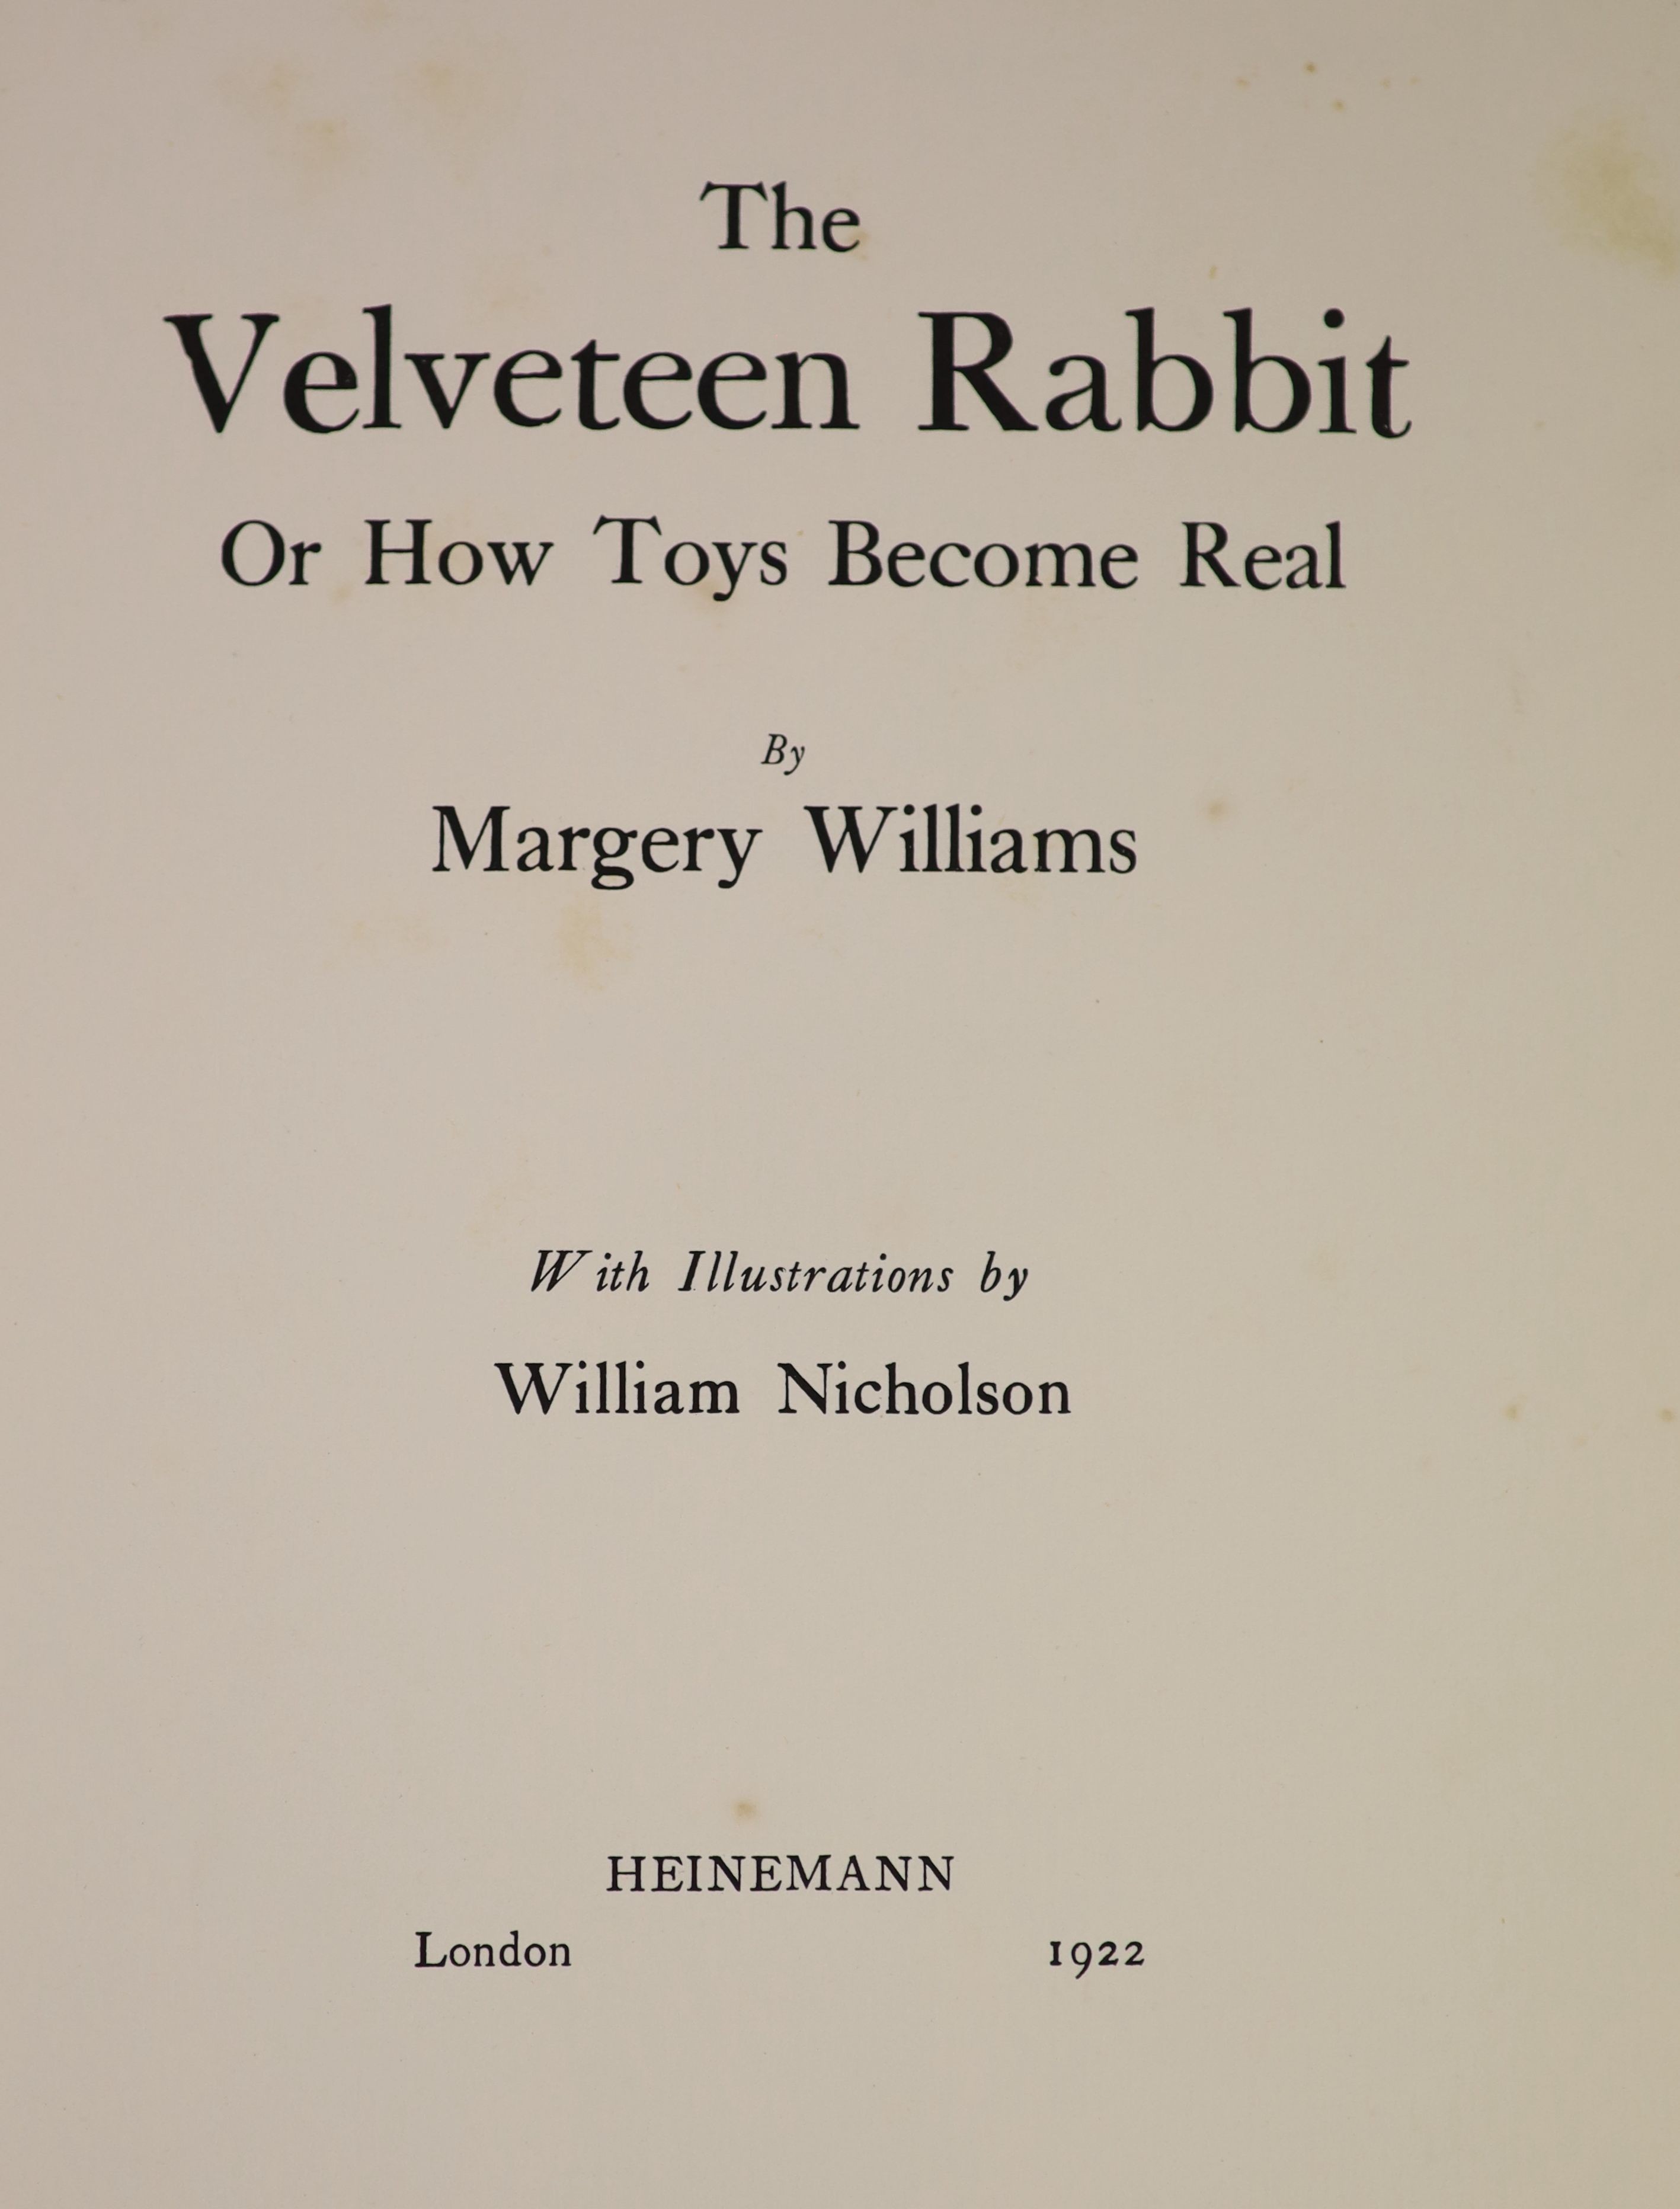 Bianco, Margery Williams - The Velveteen Rabbit or How Toys Become Real, 1st edition, illustrated by William Nicholson, original pictorial boards, with d/j, with 7 colour plates, Heinemann, London, 1922